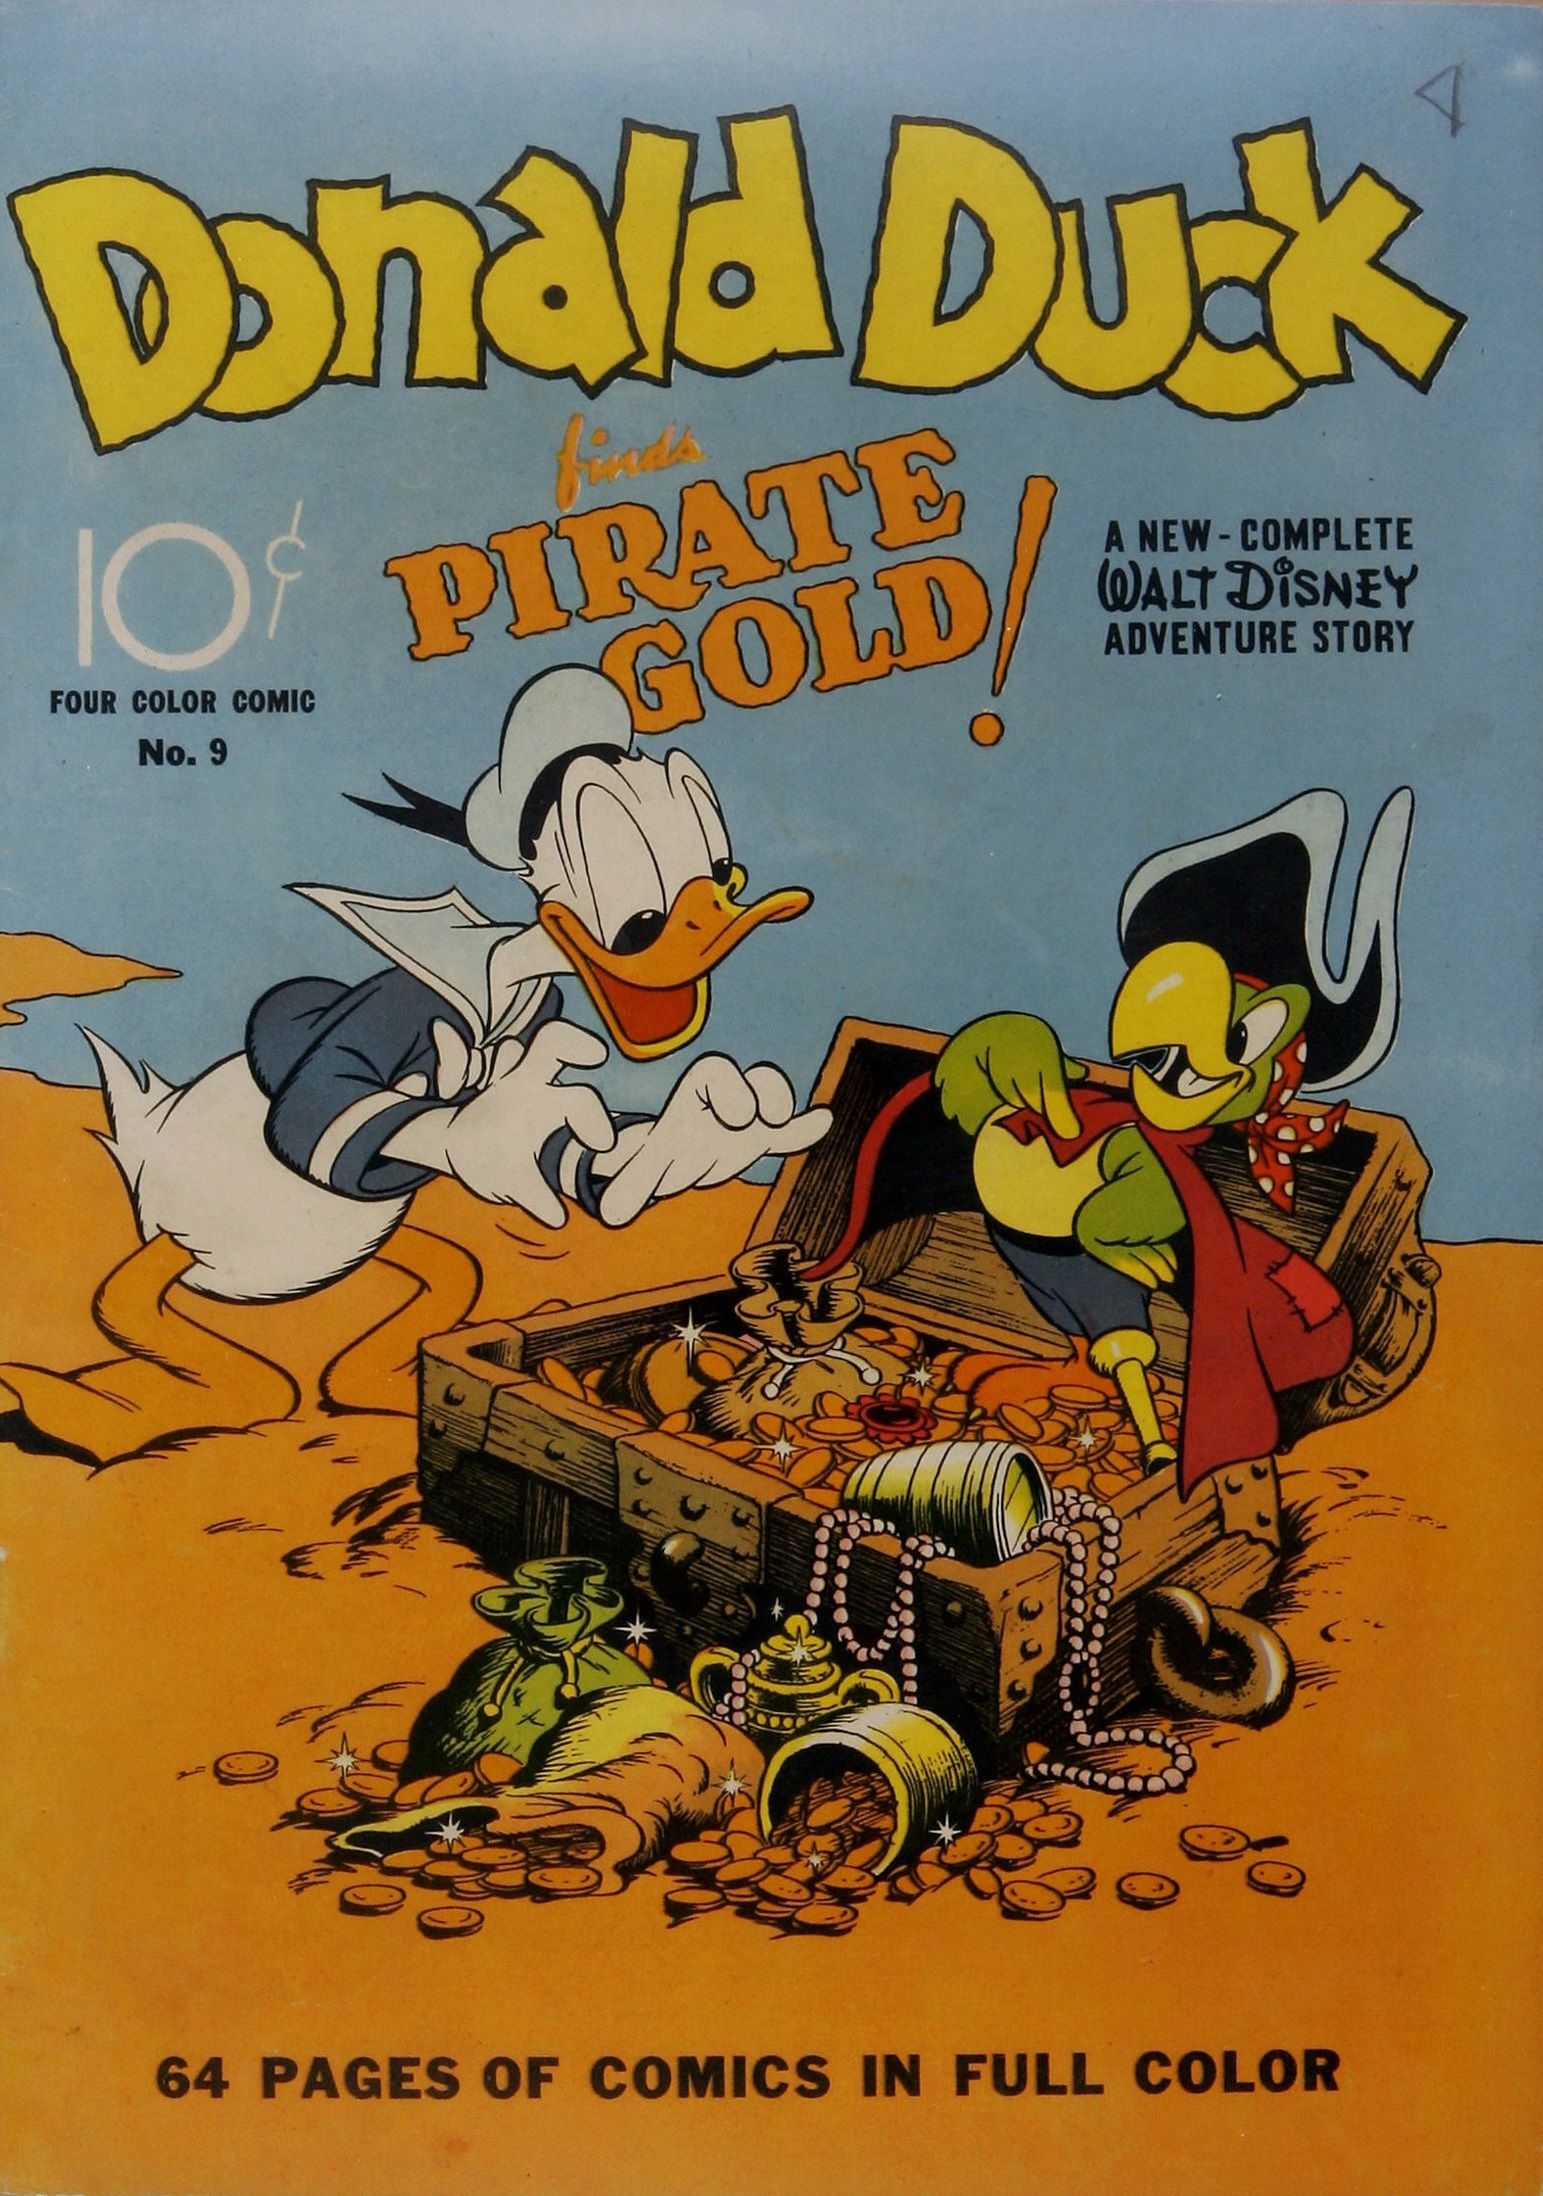 Donald Duck discover pirate gold!